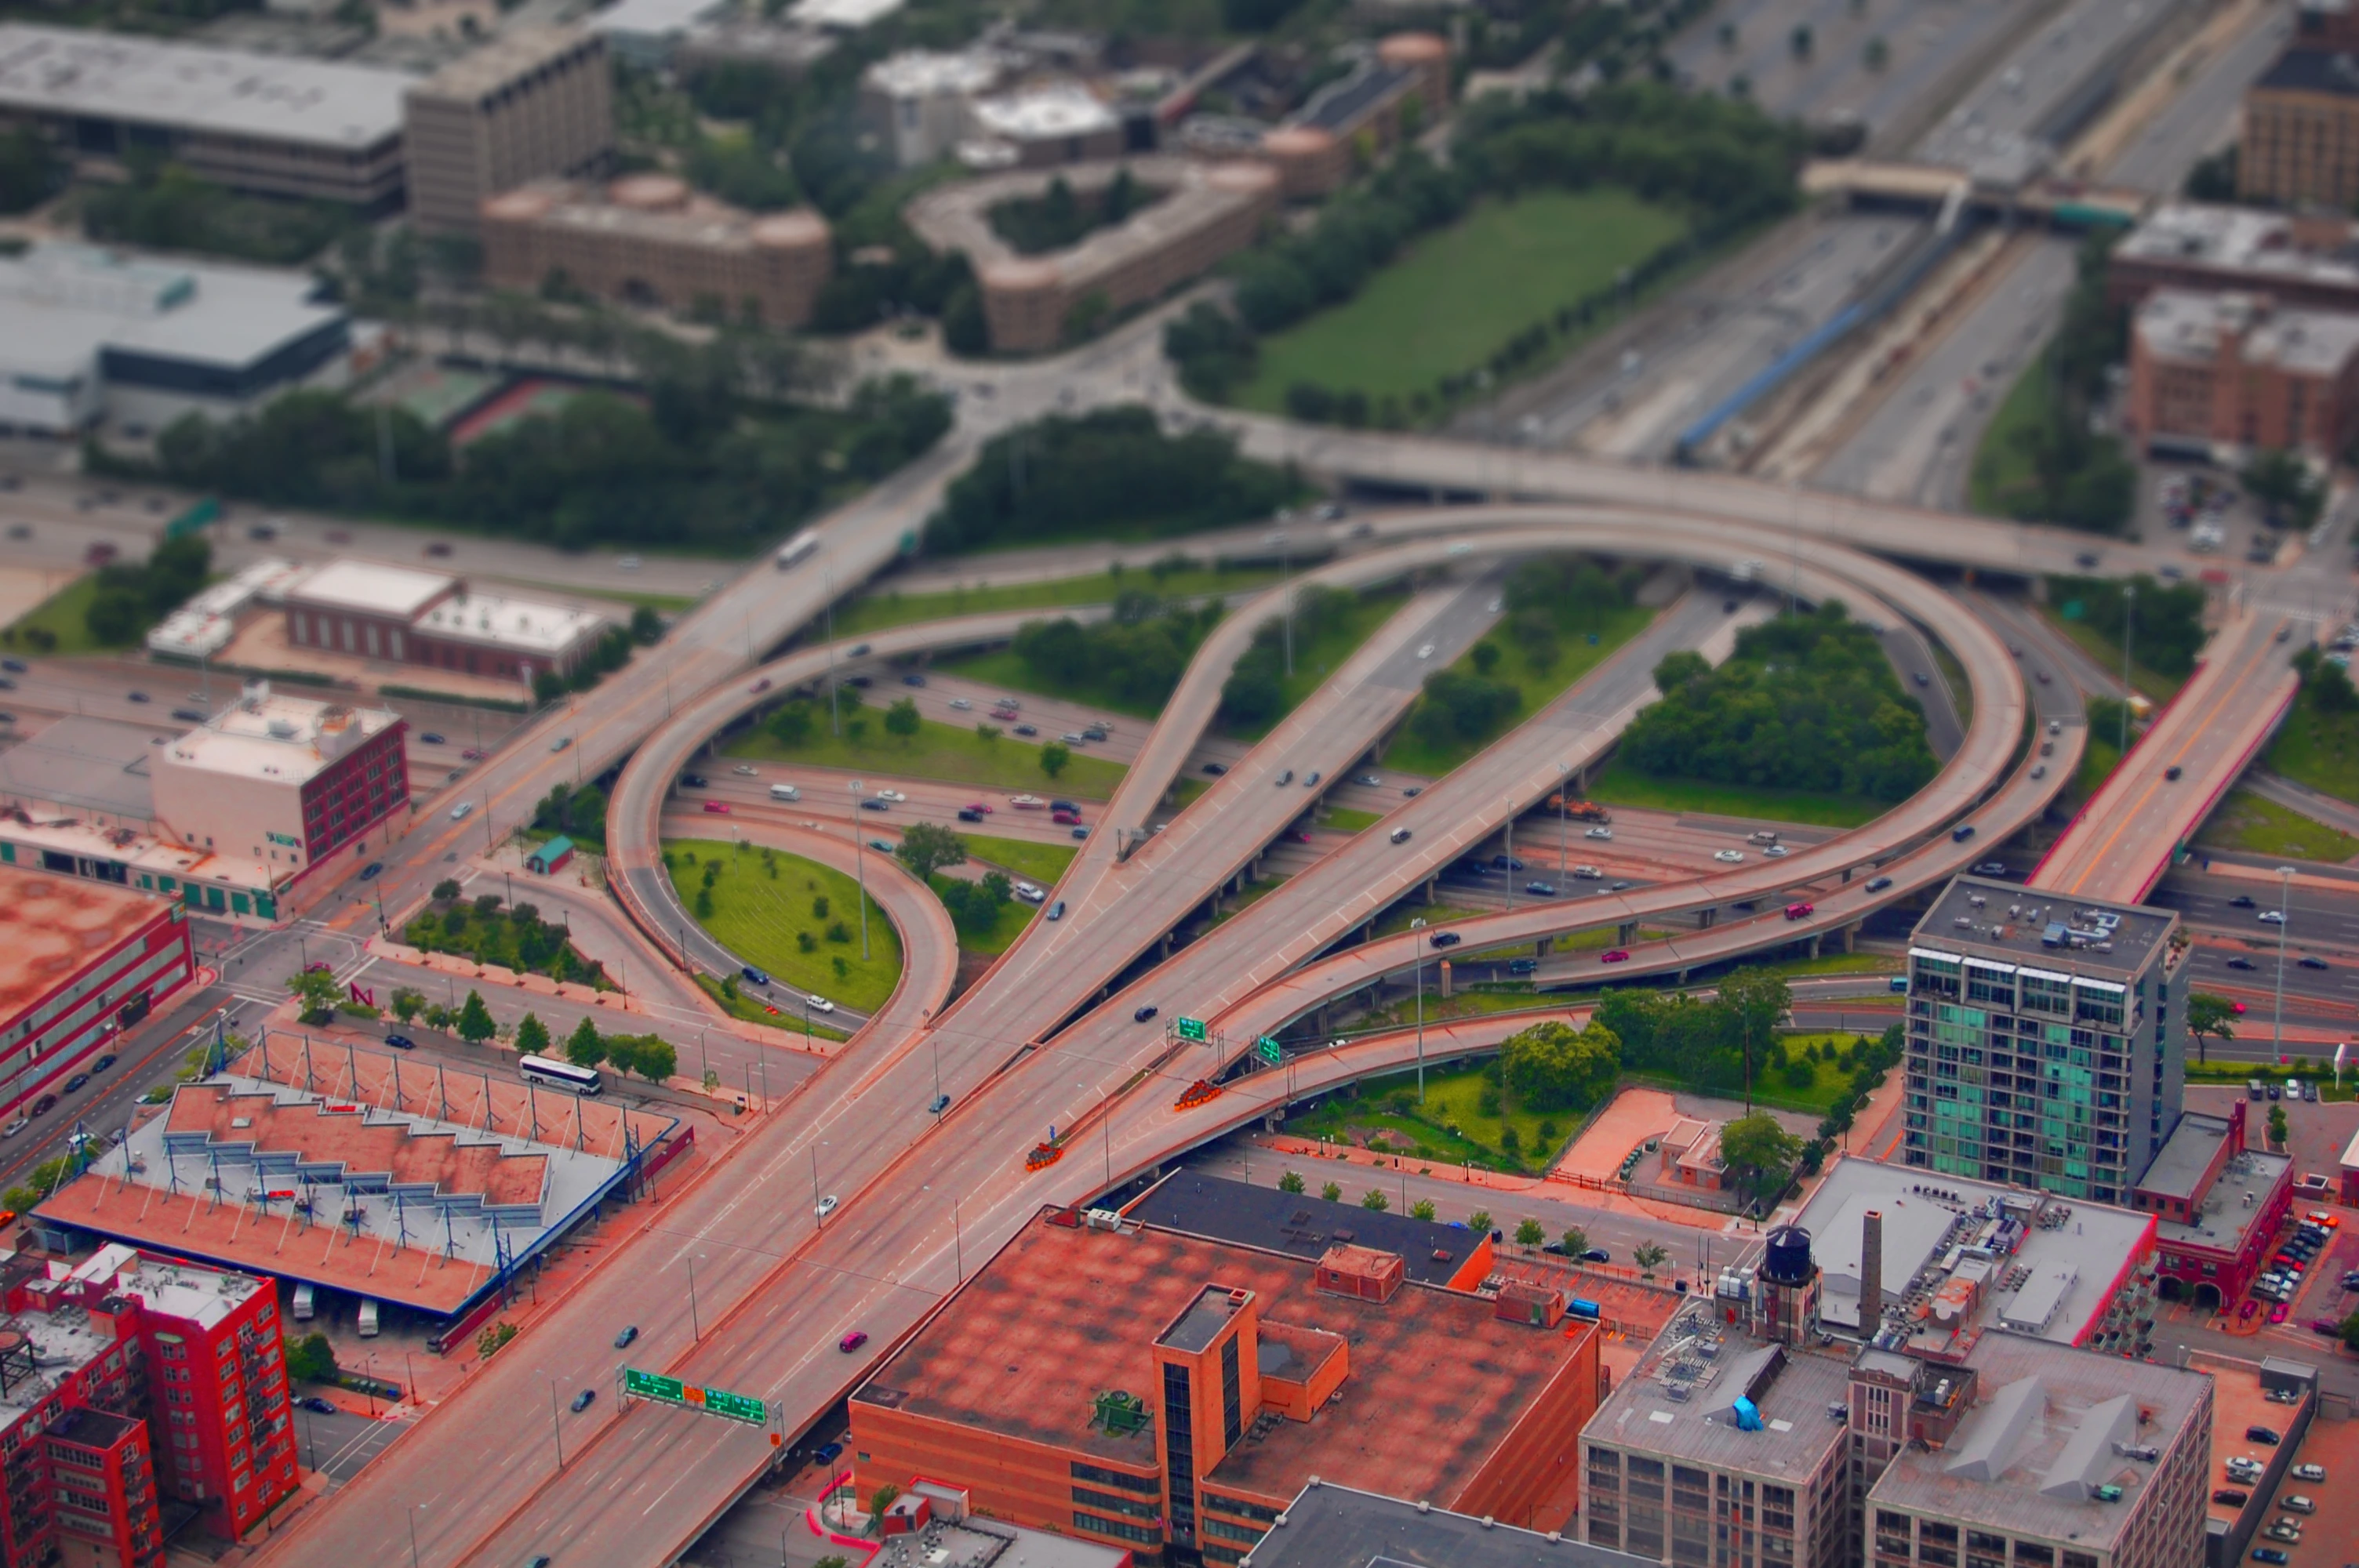 Clickable thumbnail of photo showing a freeway.